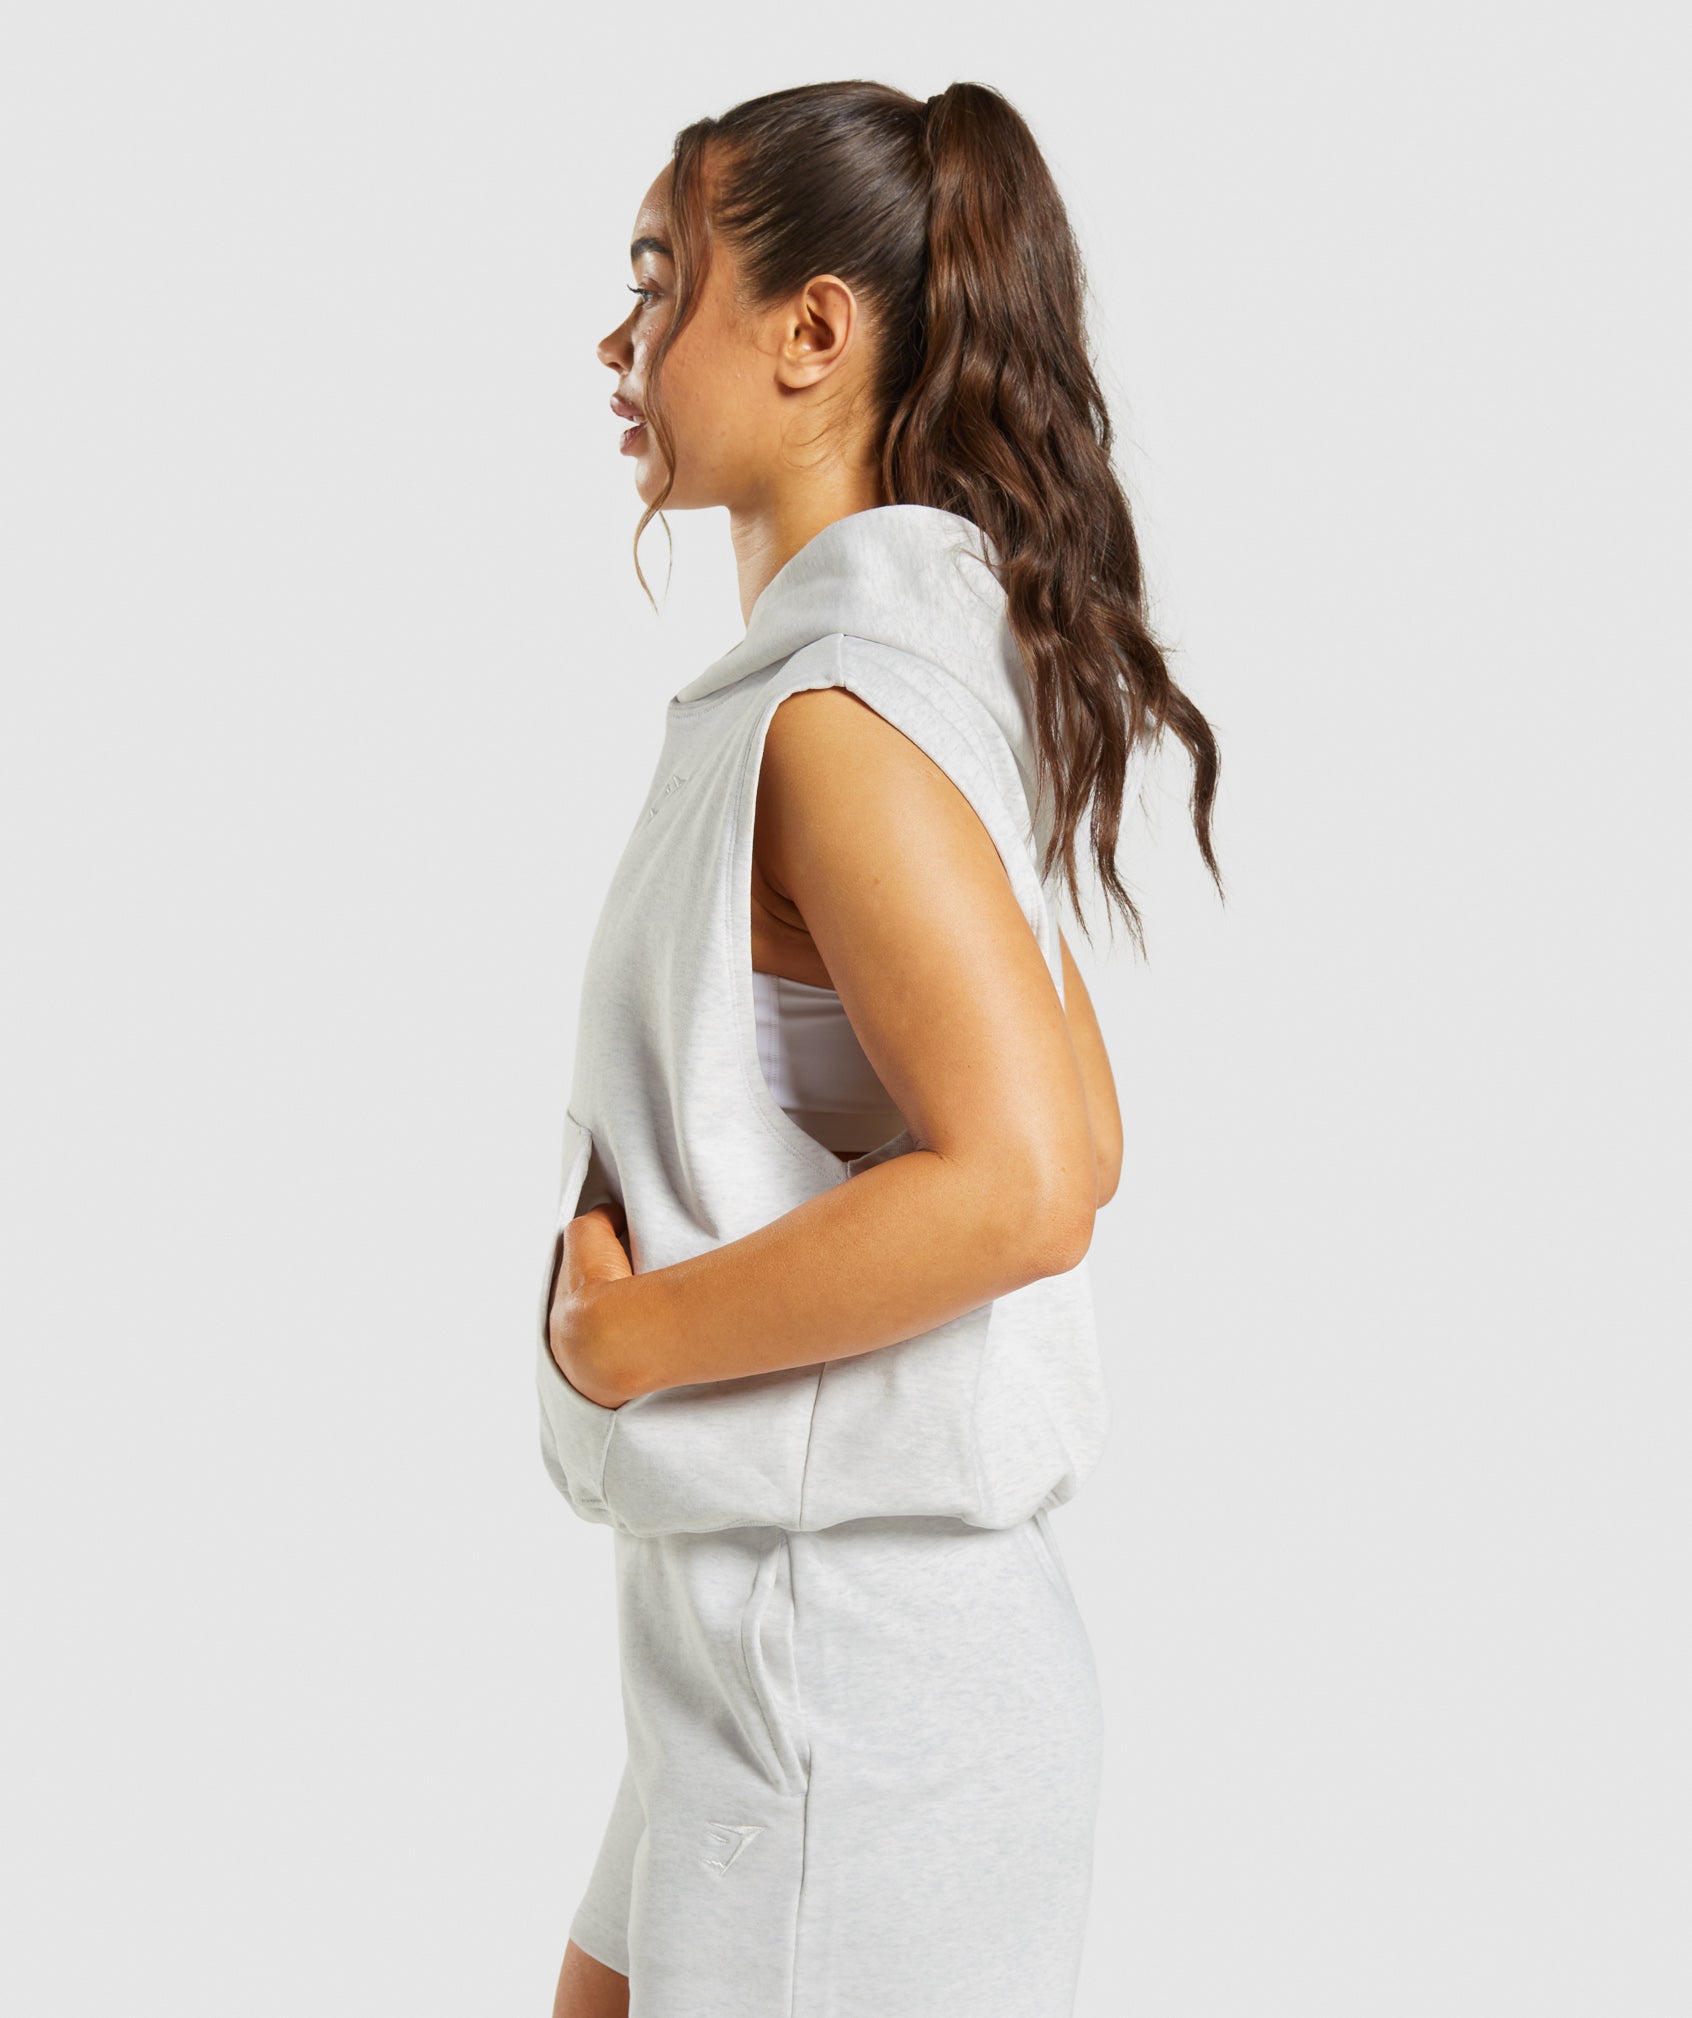 Rest Day Sweats Sleeveless Hoodie product image 3